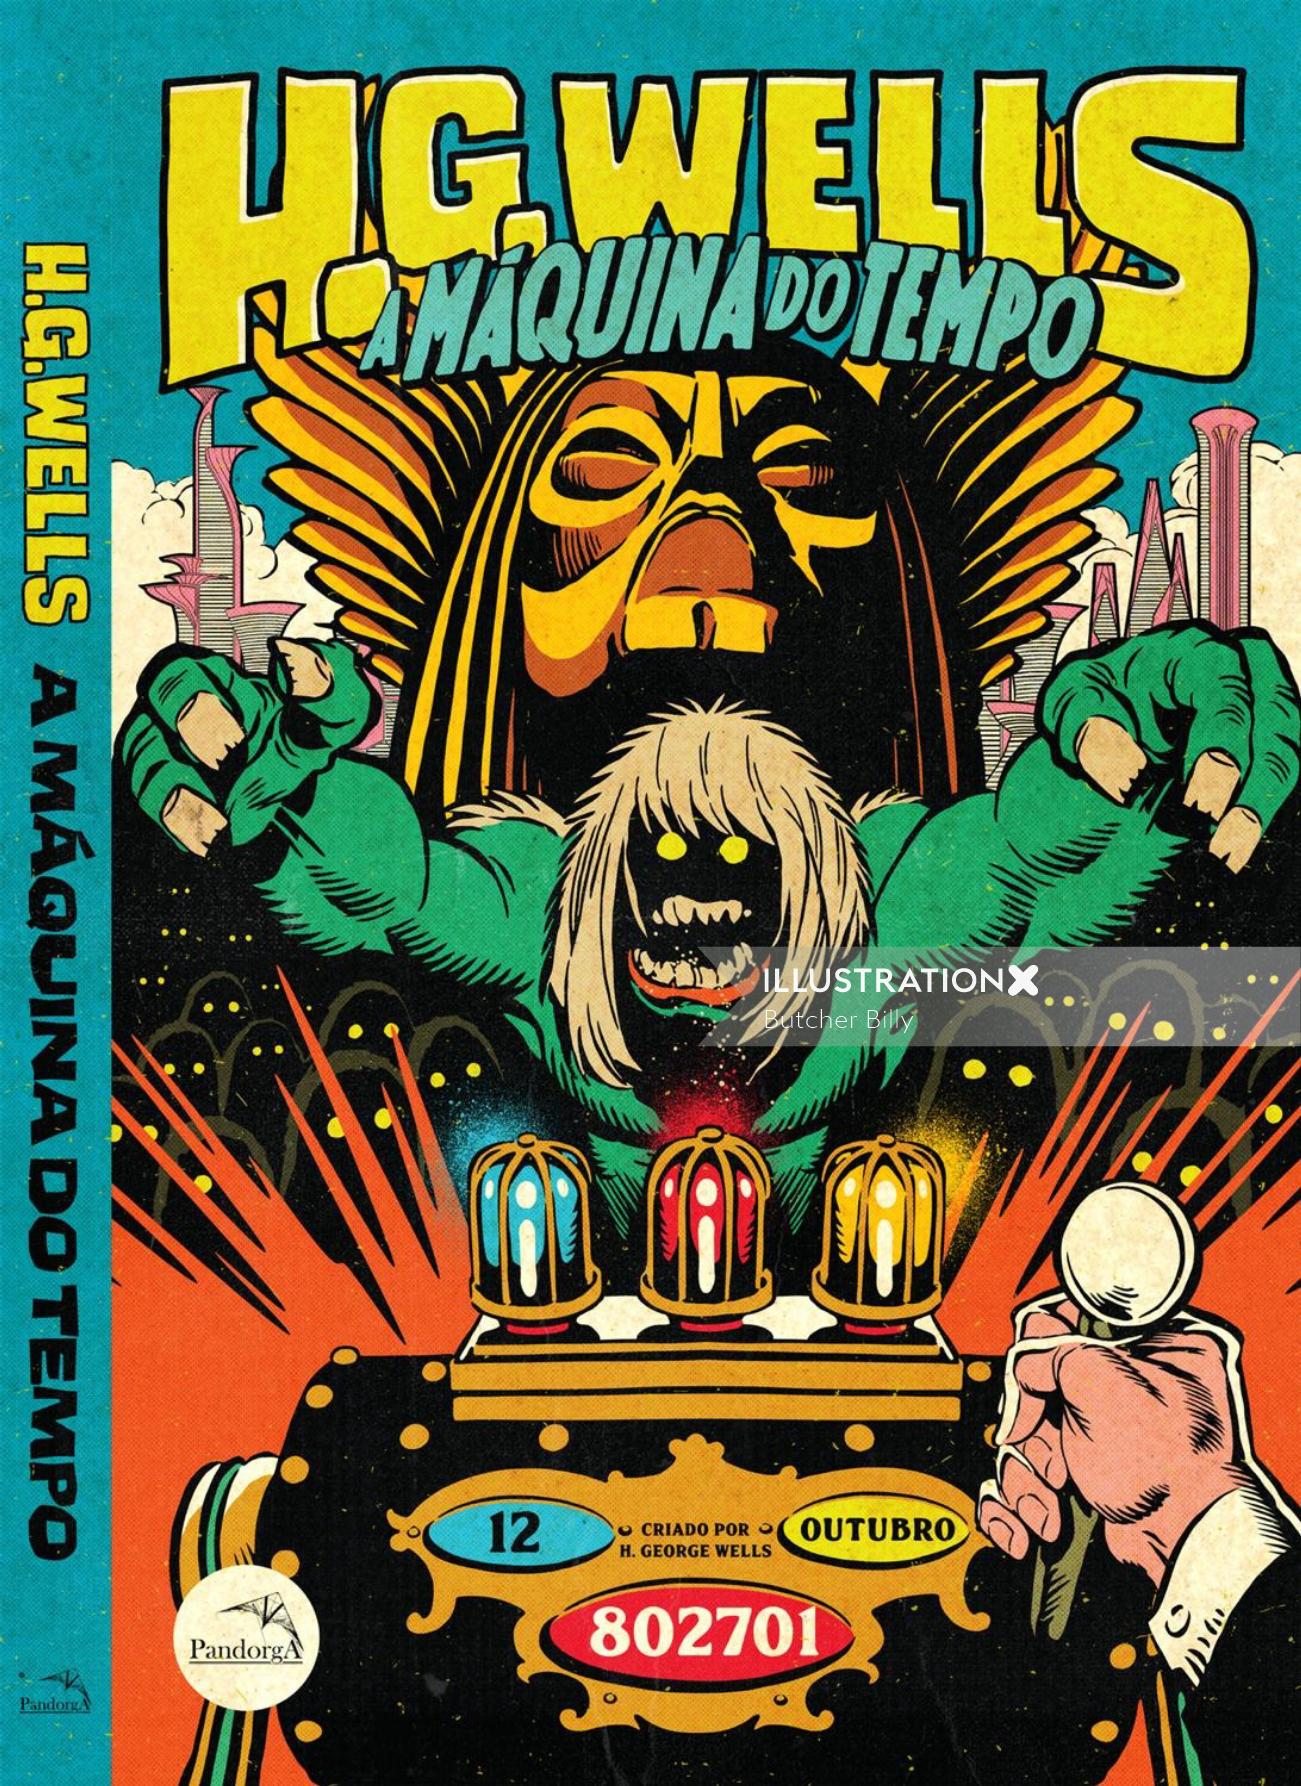 H.G. Wells's A Maquina Do Tempo book box, designed by Butcher Billy